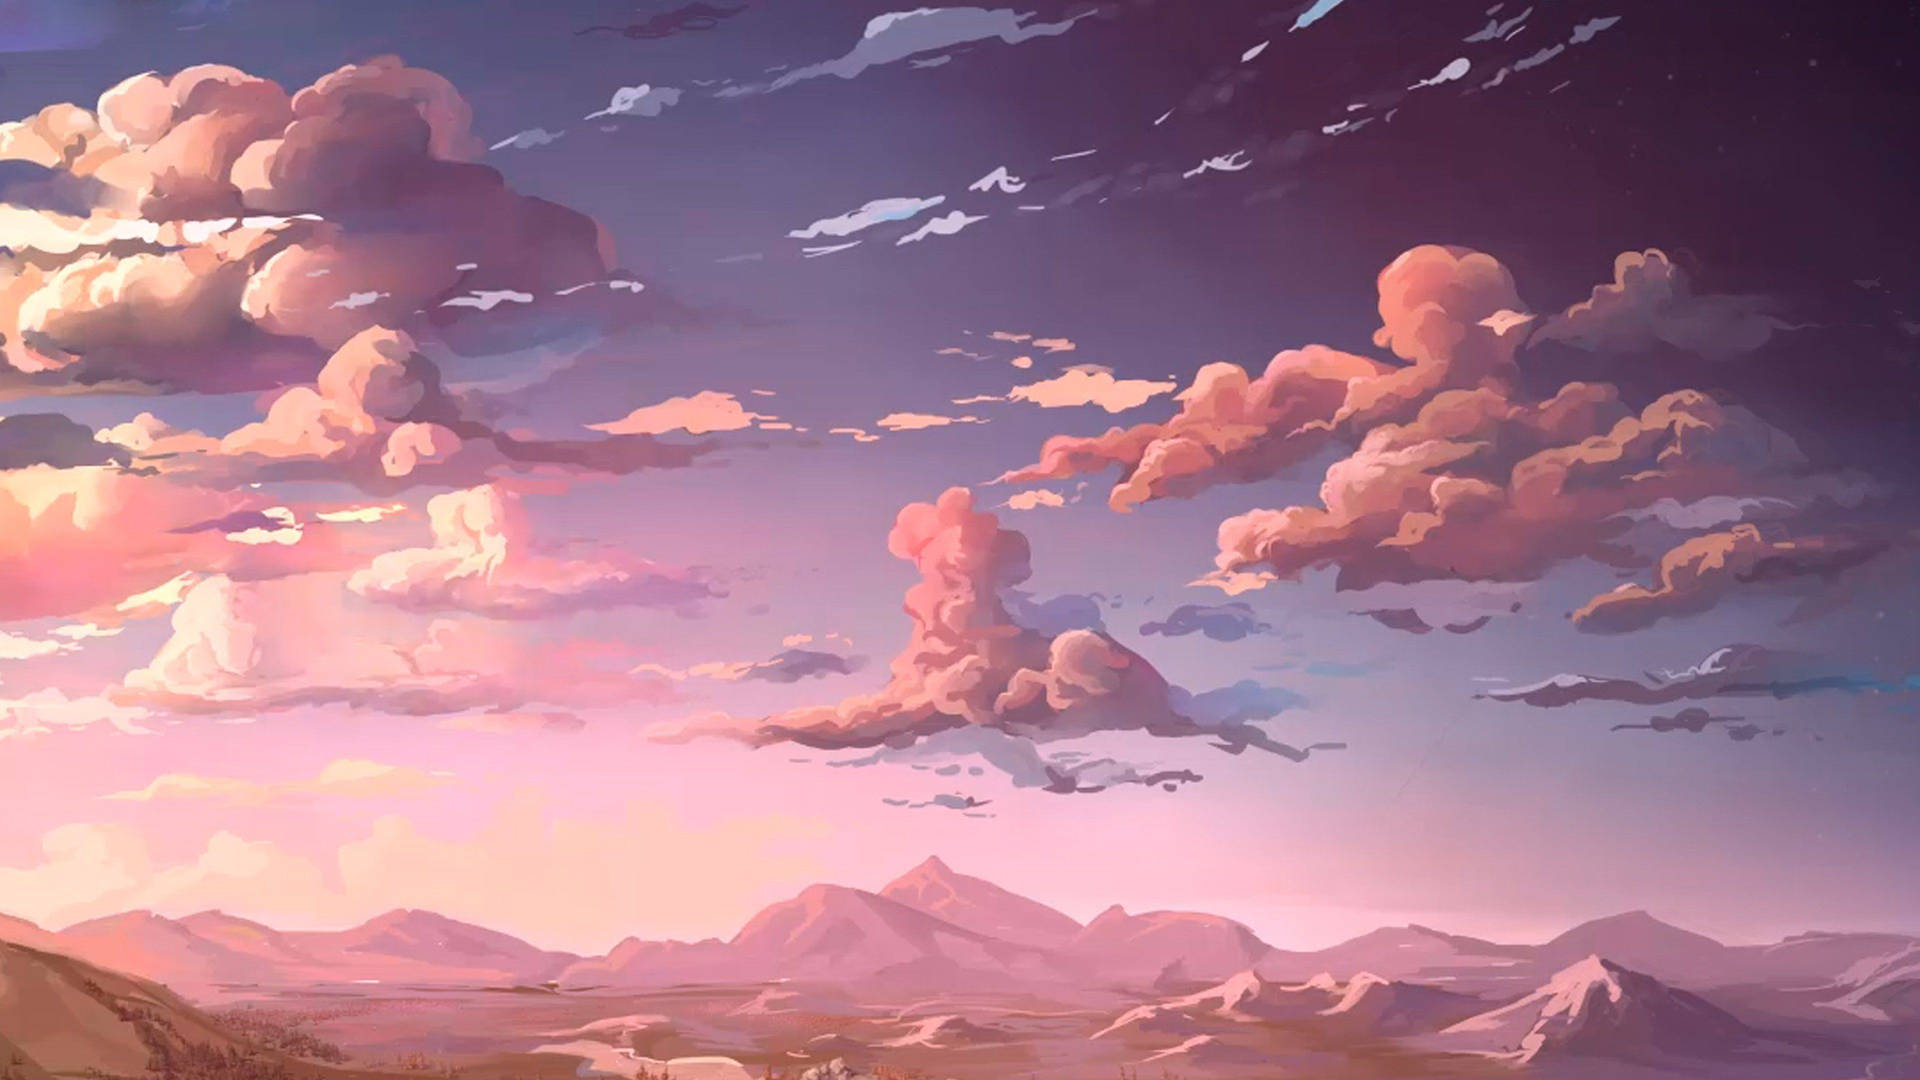 Anime Clouds And Mountains Aesthetic Mac Wallpaper